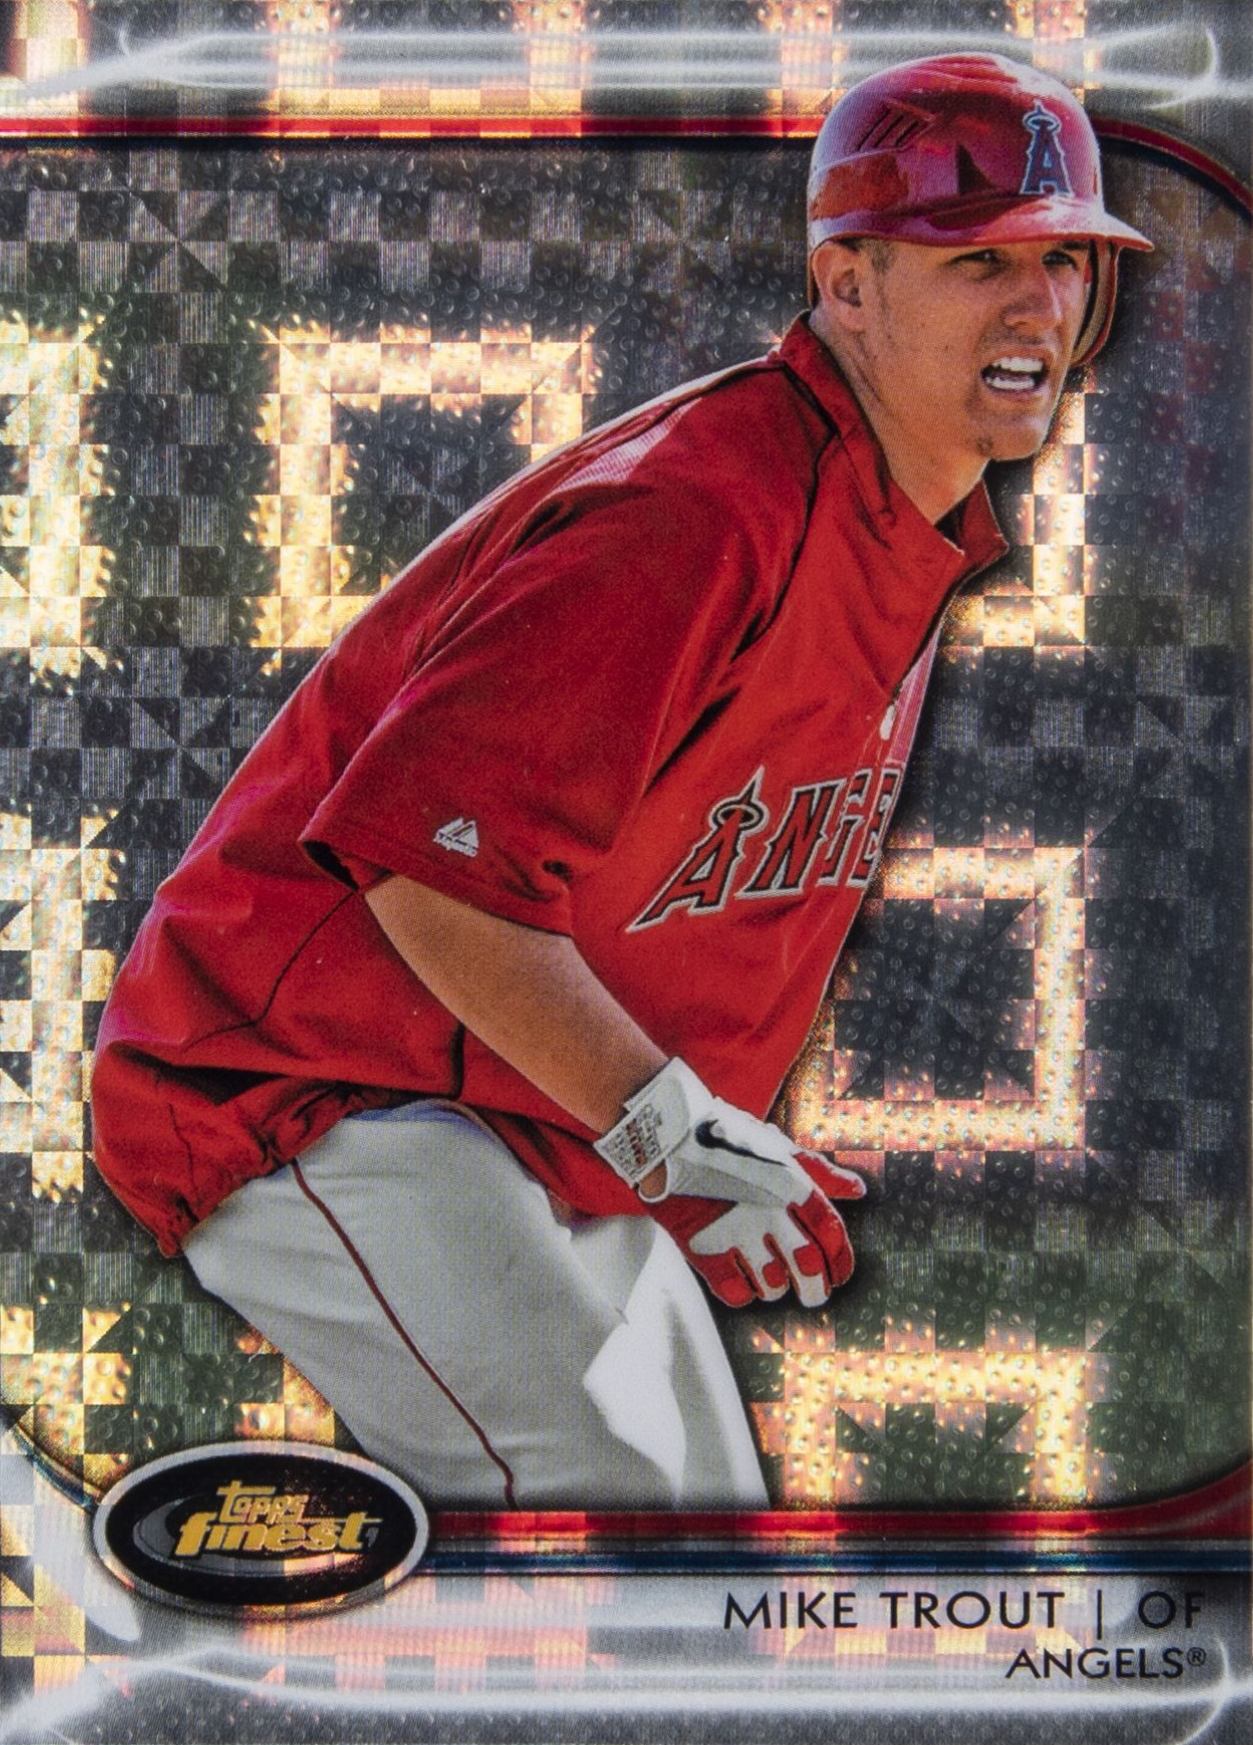 2012 Finest Mike Trout #78 Baseball Card